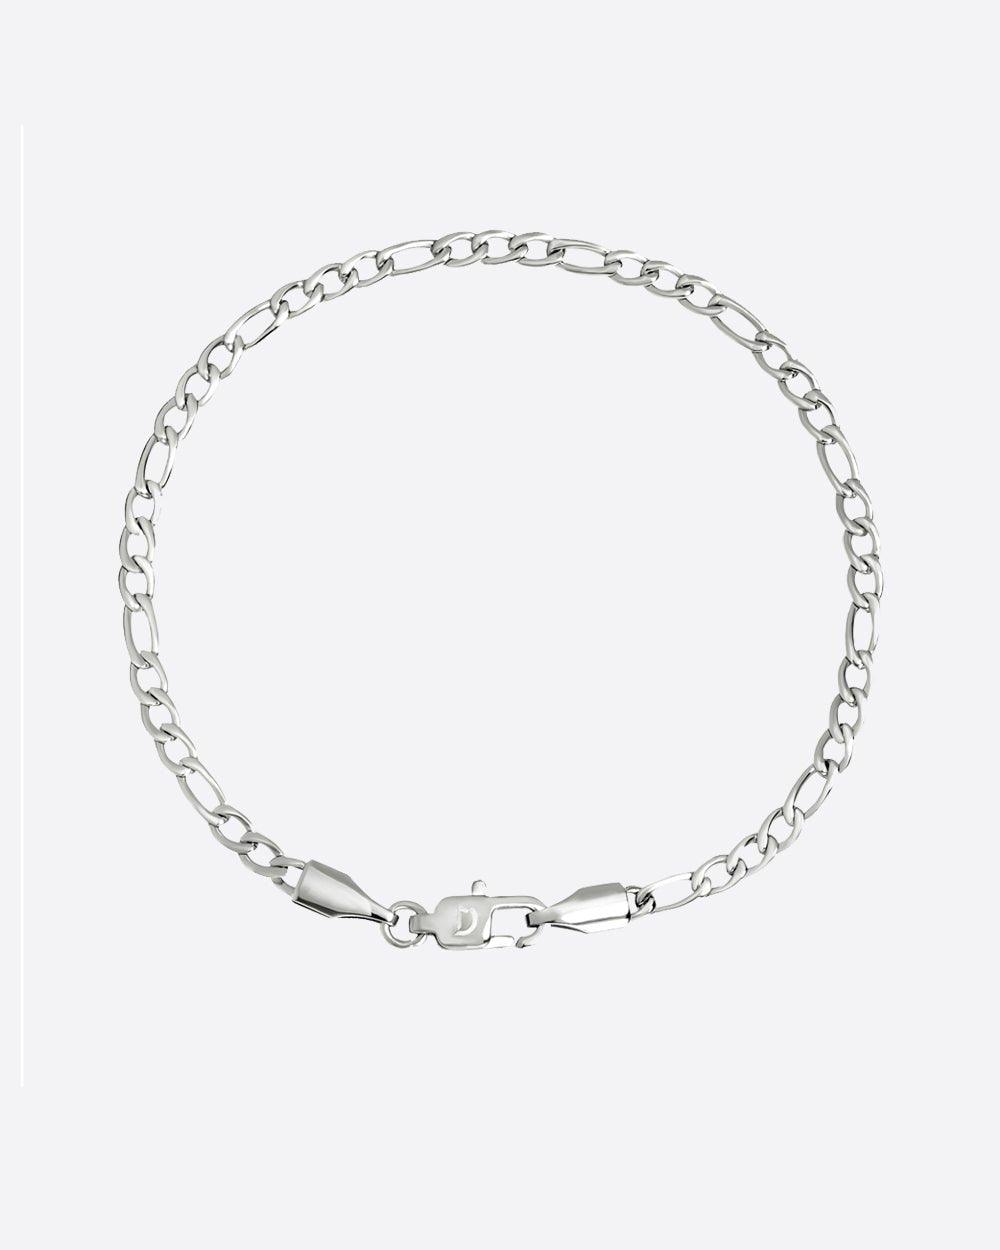 CLEAN FIGARO BRACELET. - 3MM WHITE GOLD - DRIP IN THE JEWEL